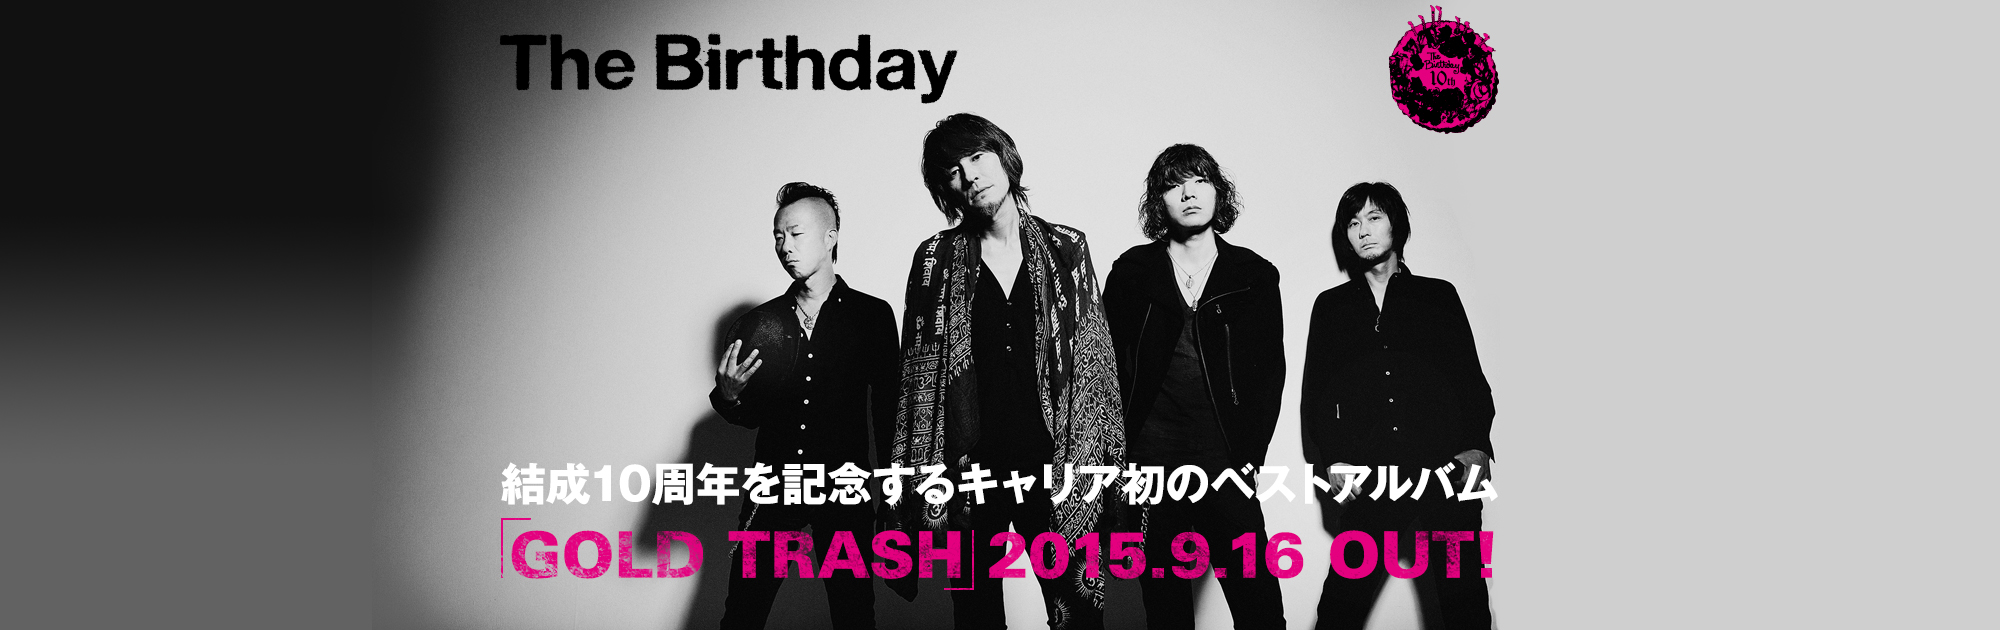 The Birthday BEST ALBUM GOLD TRASH 2015.9.16 OUT!